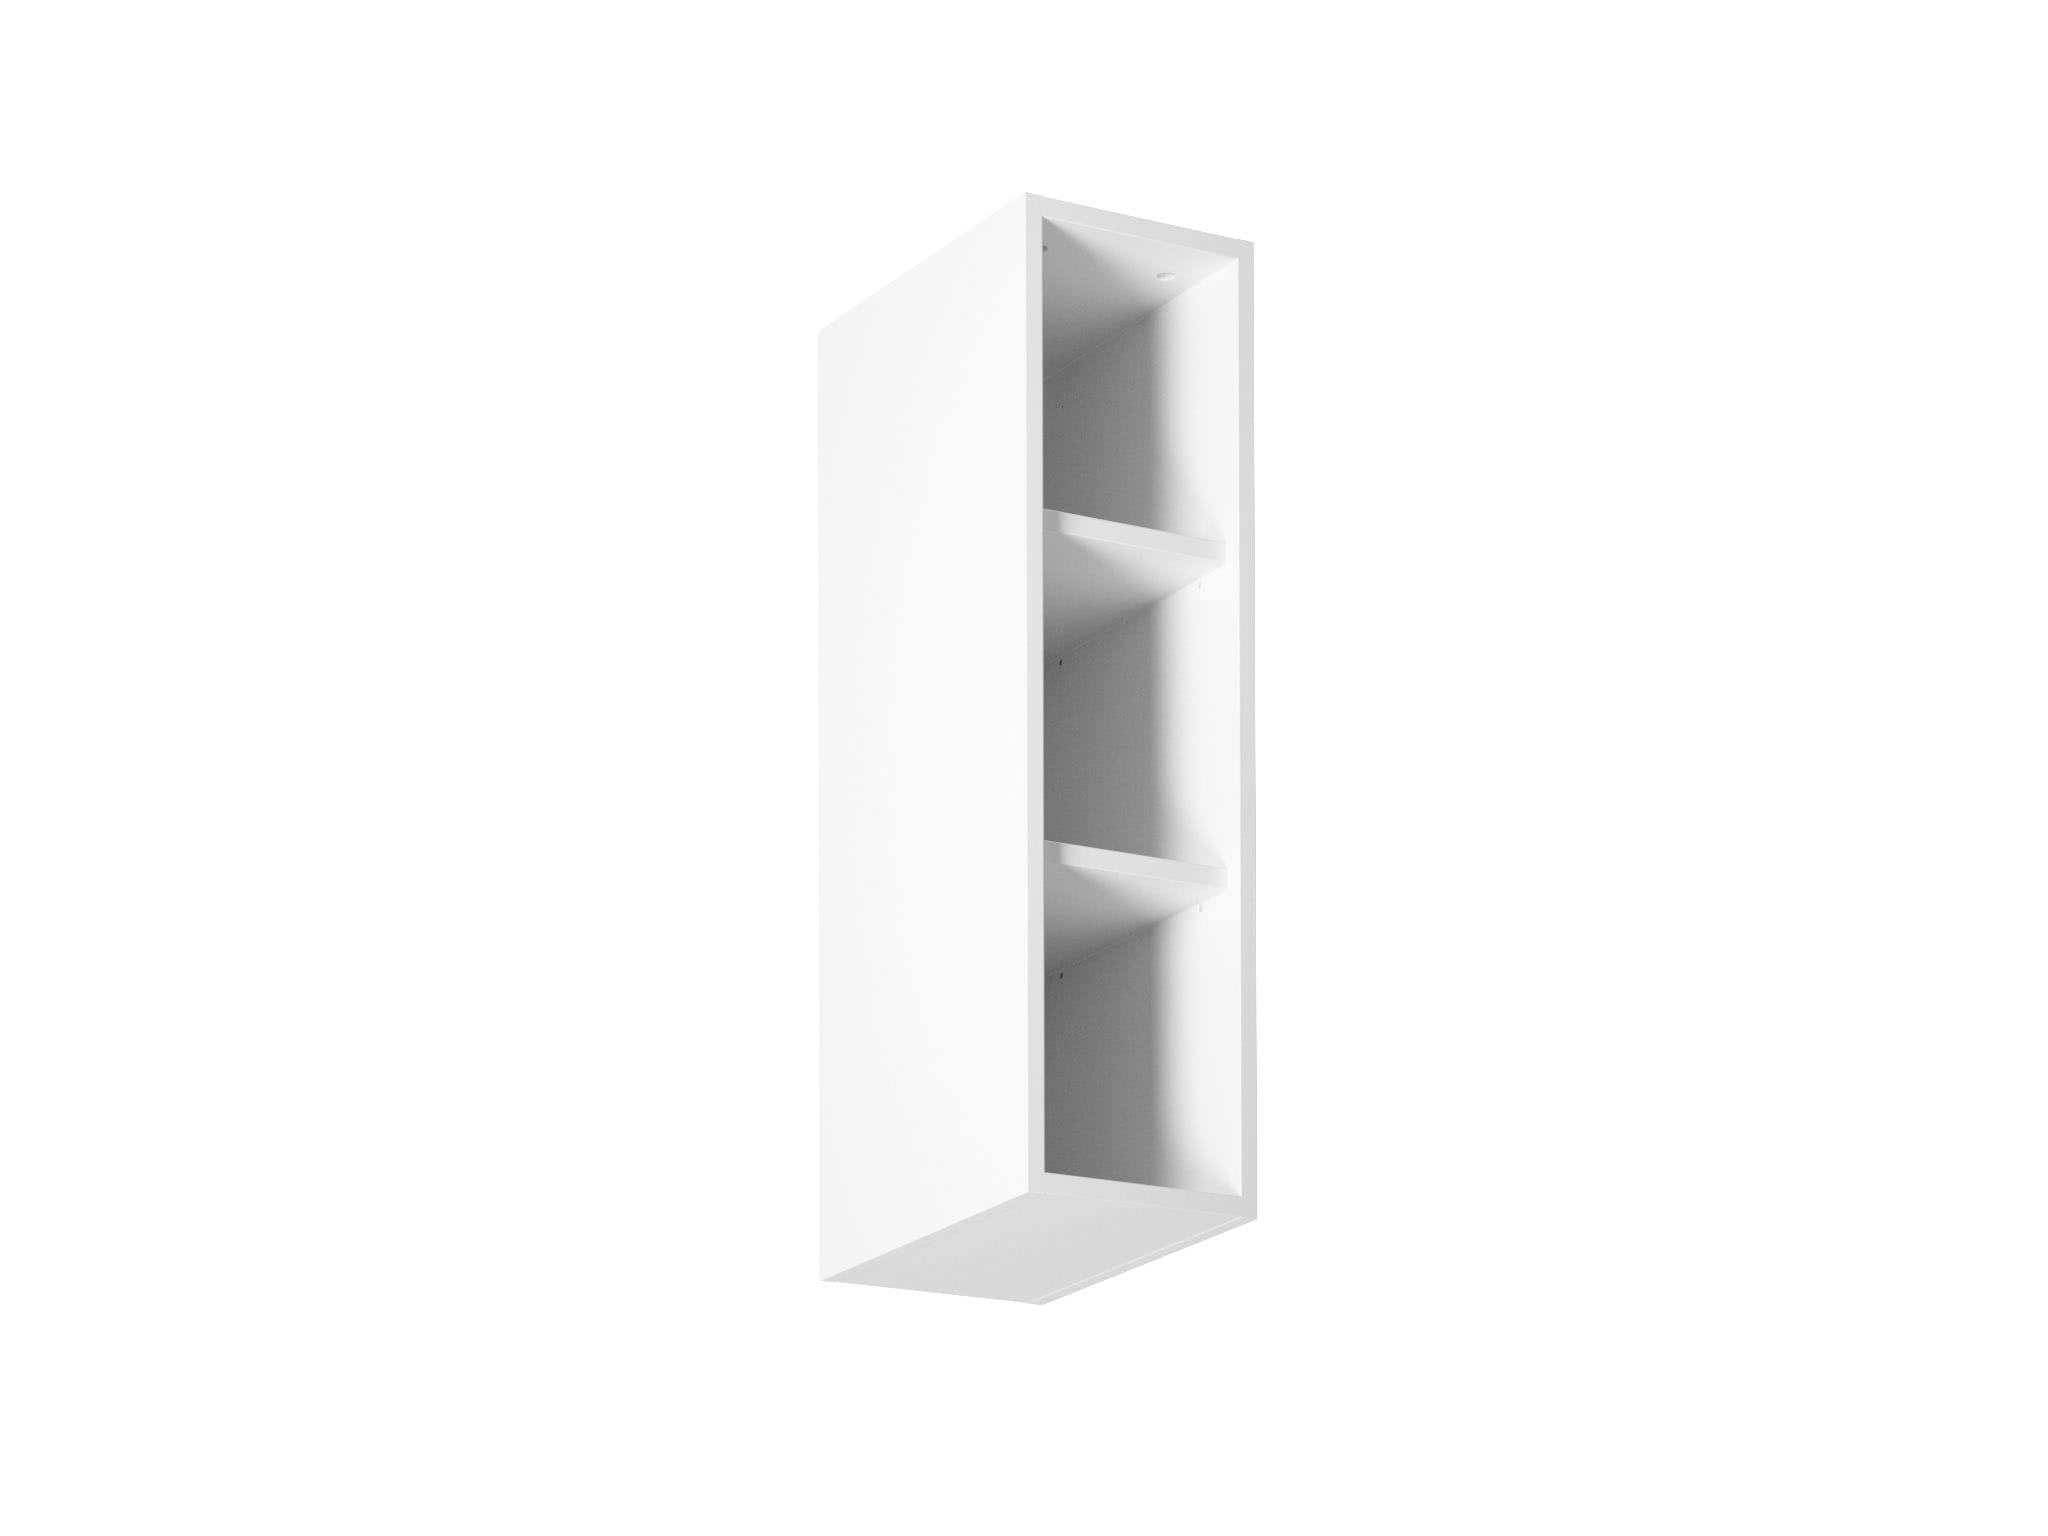 WHITE WALL CABINET WITH THREE SHELVES IN MODERN FOR A KITCHENETTE SET W200